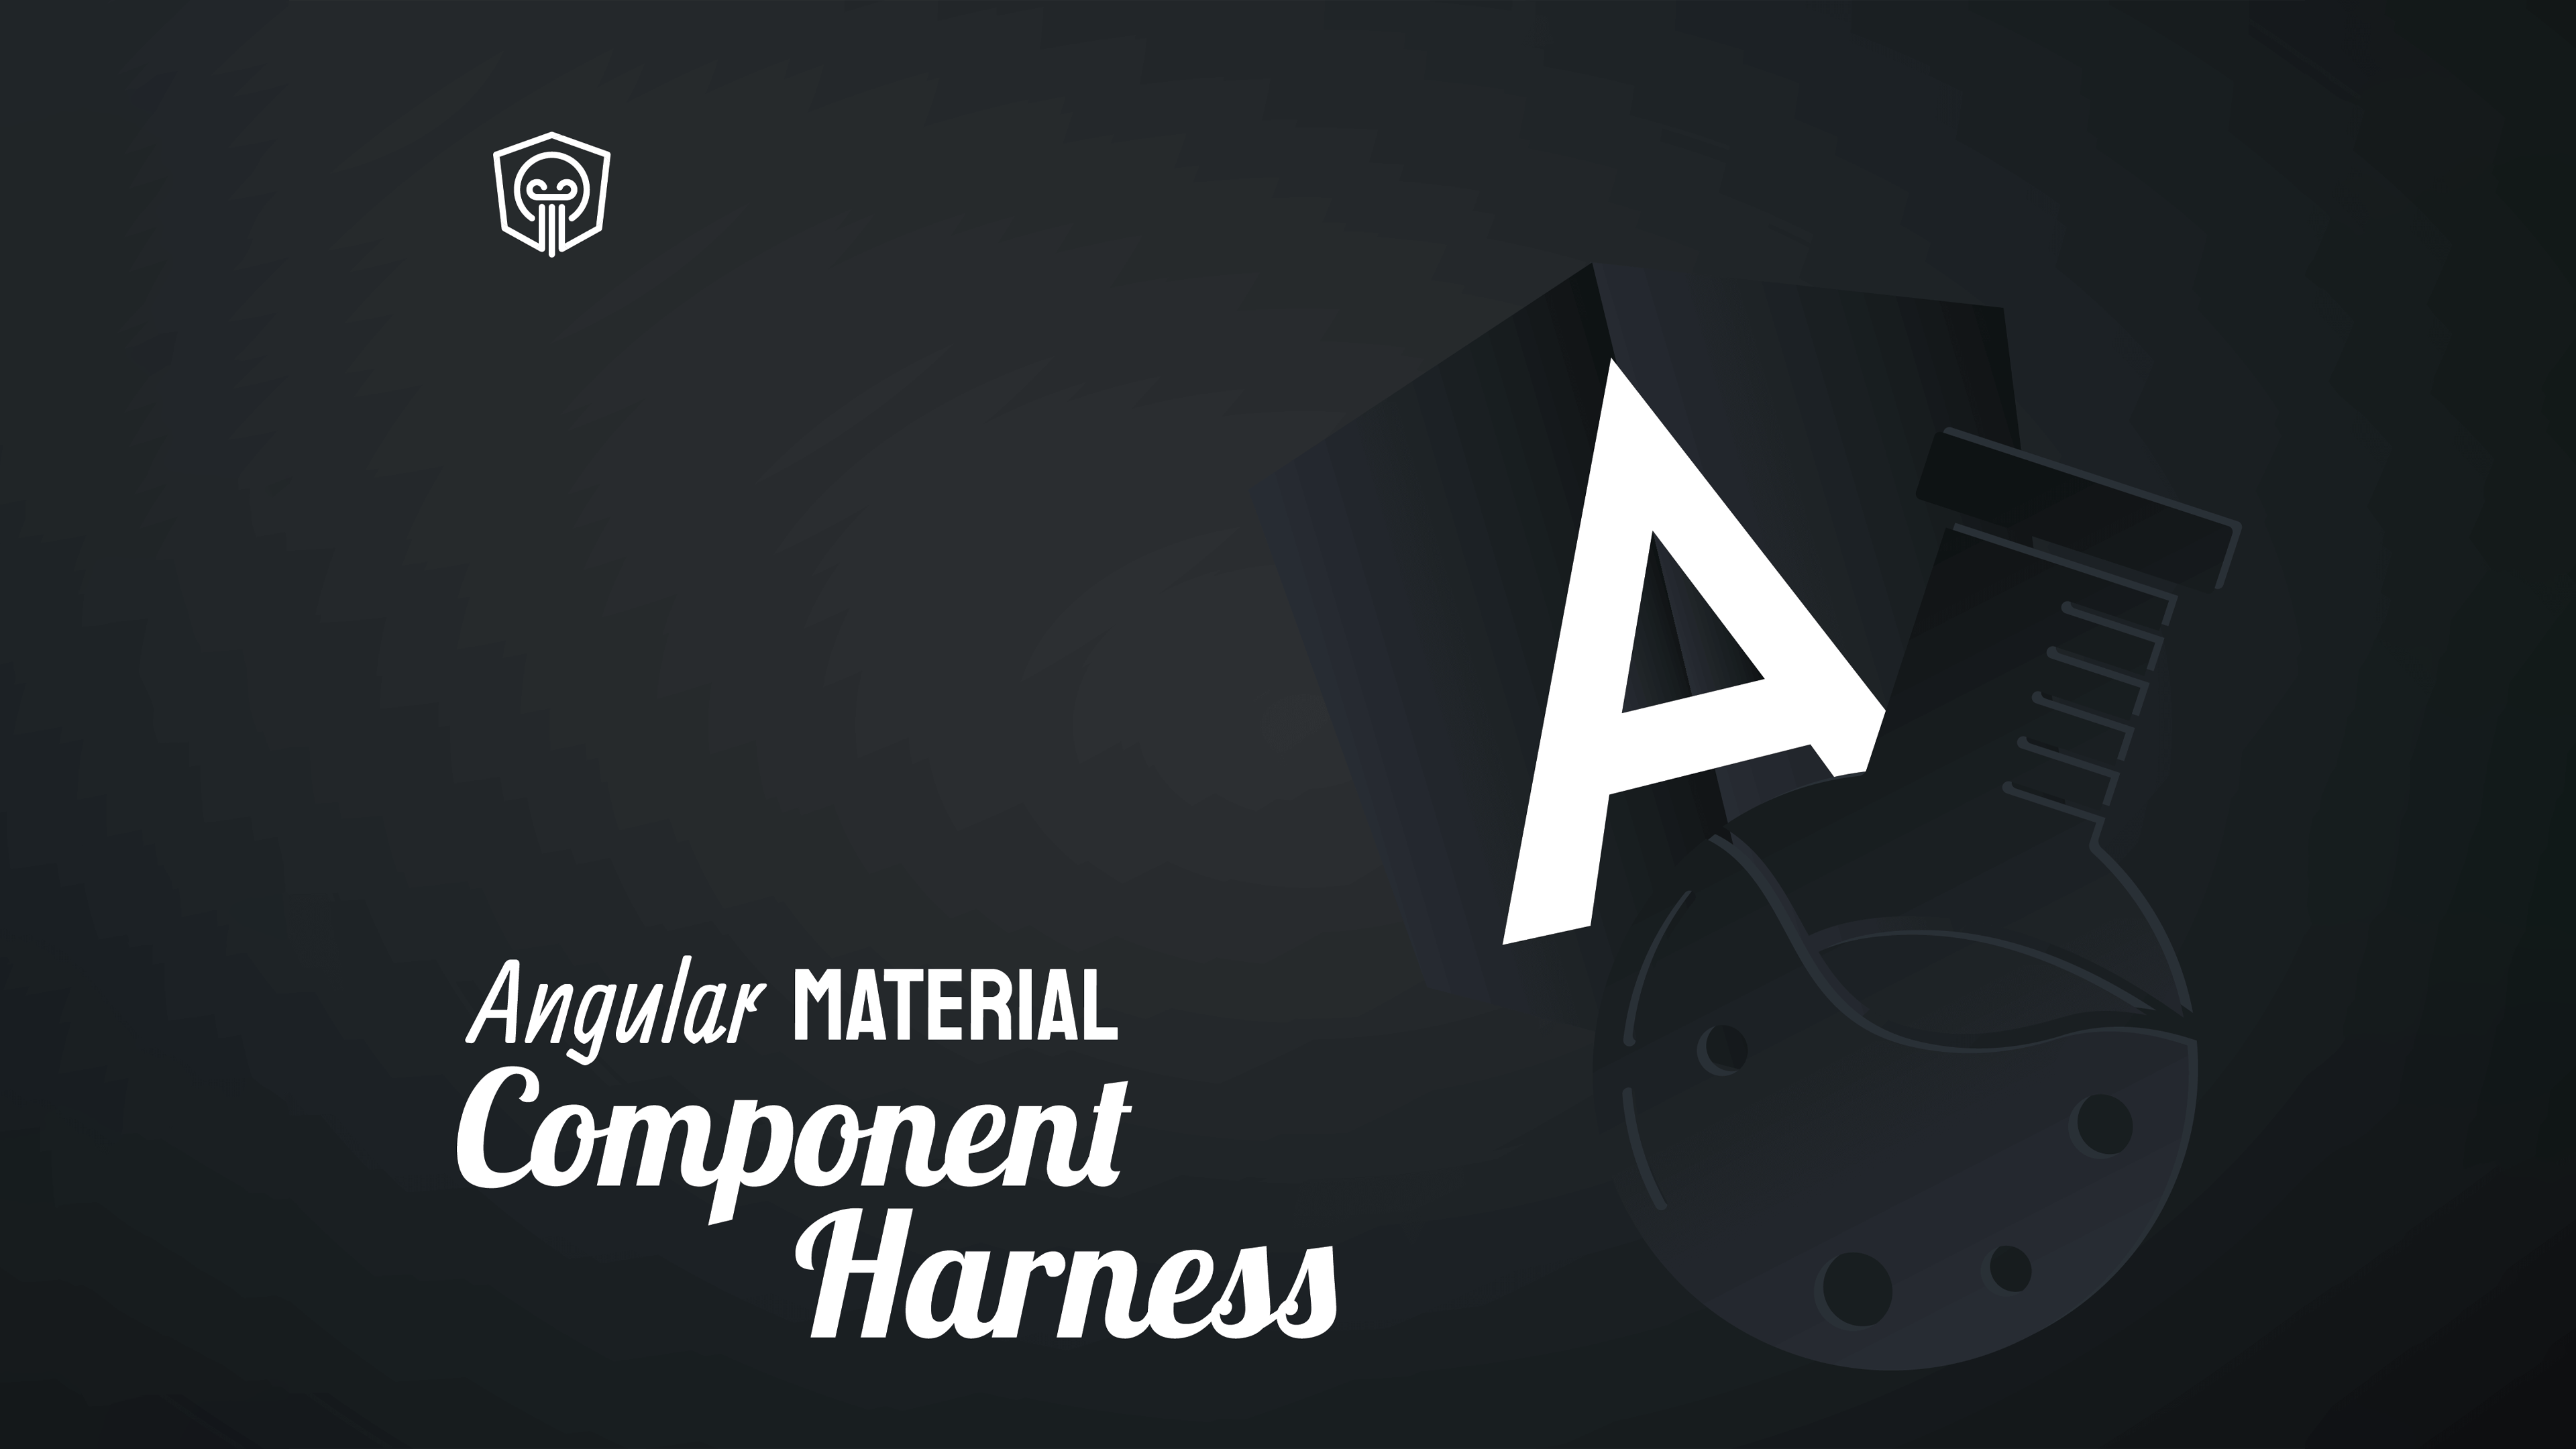 Angular Material component harnesses